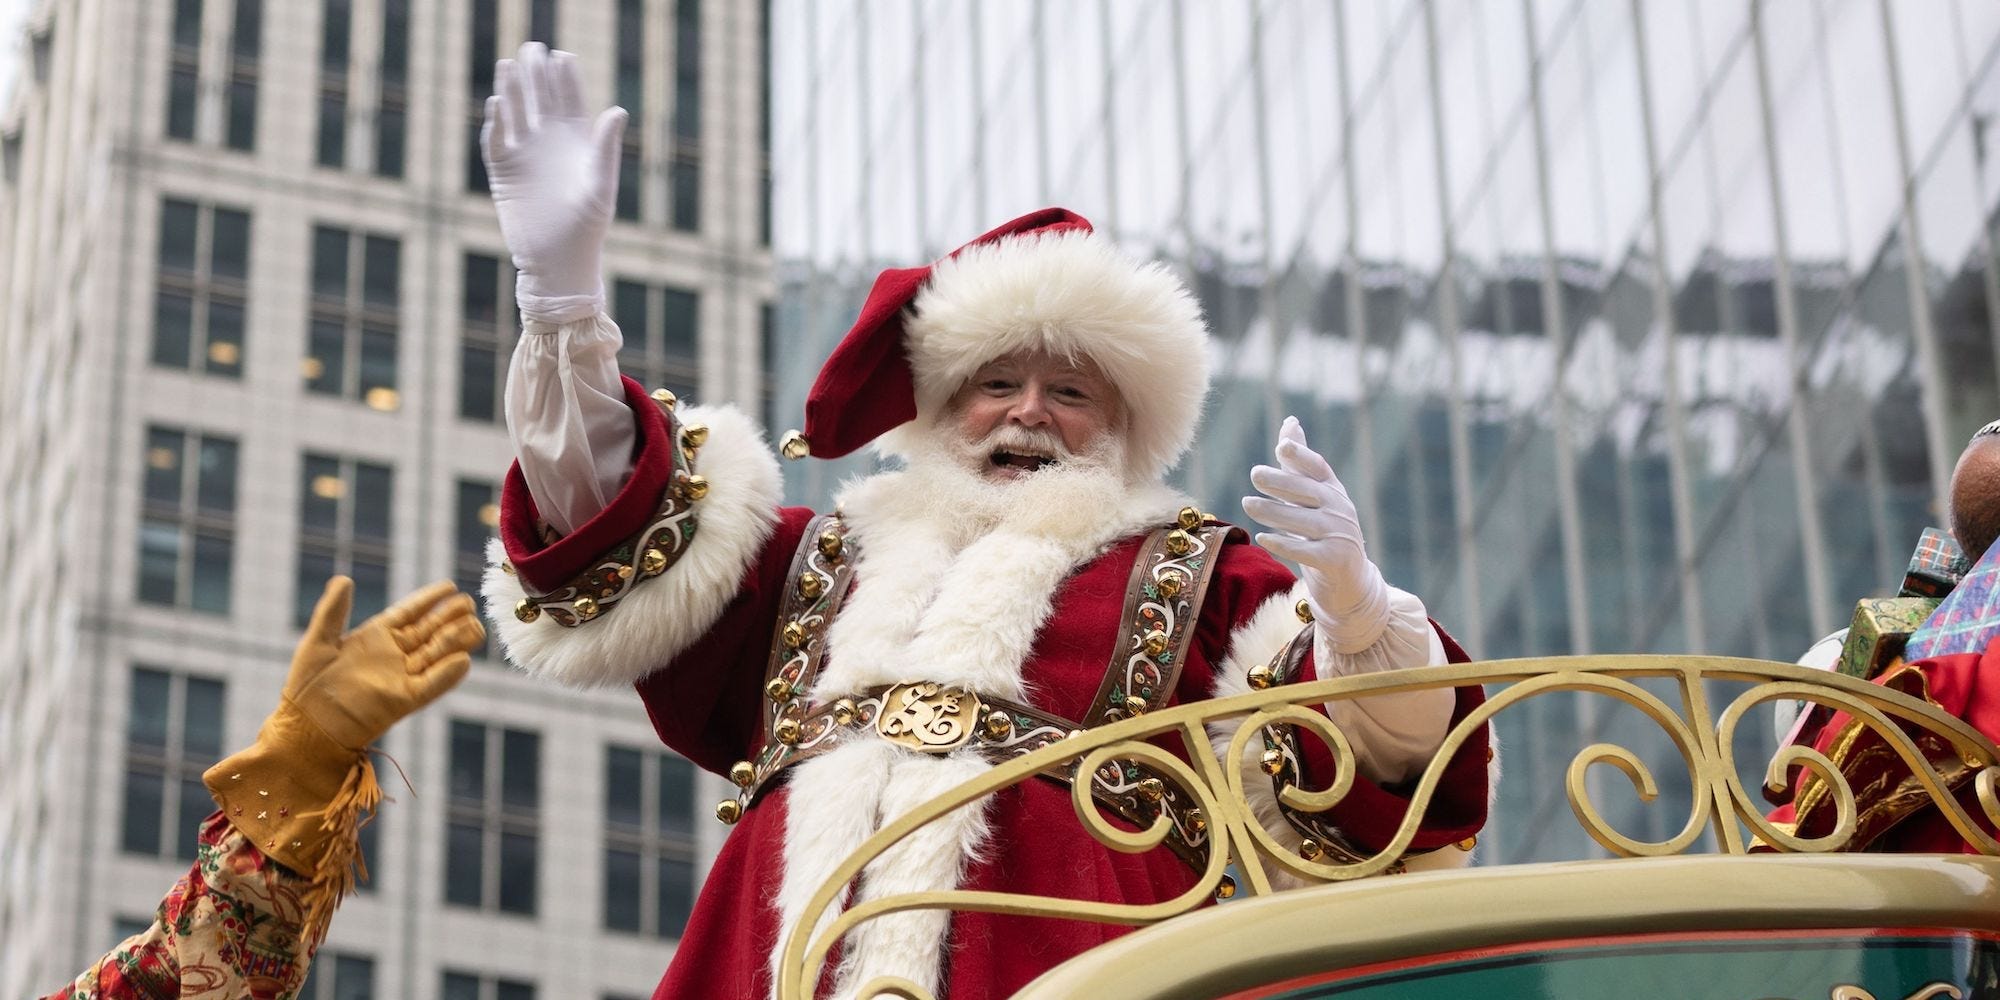 Santa Claus is seen during the Macy's Thanksgiving Day Parade in New York City, New York on November 25, 2021.